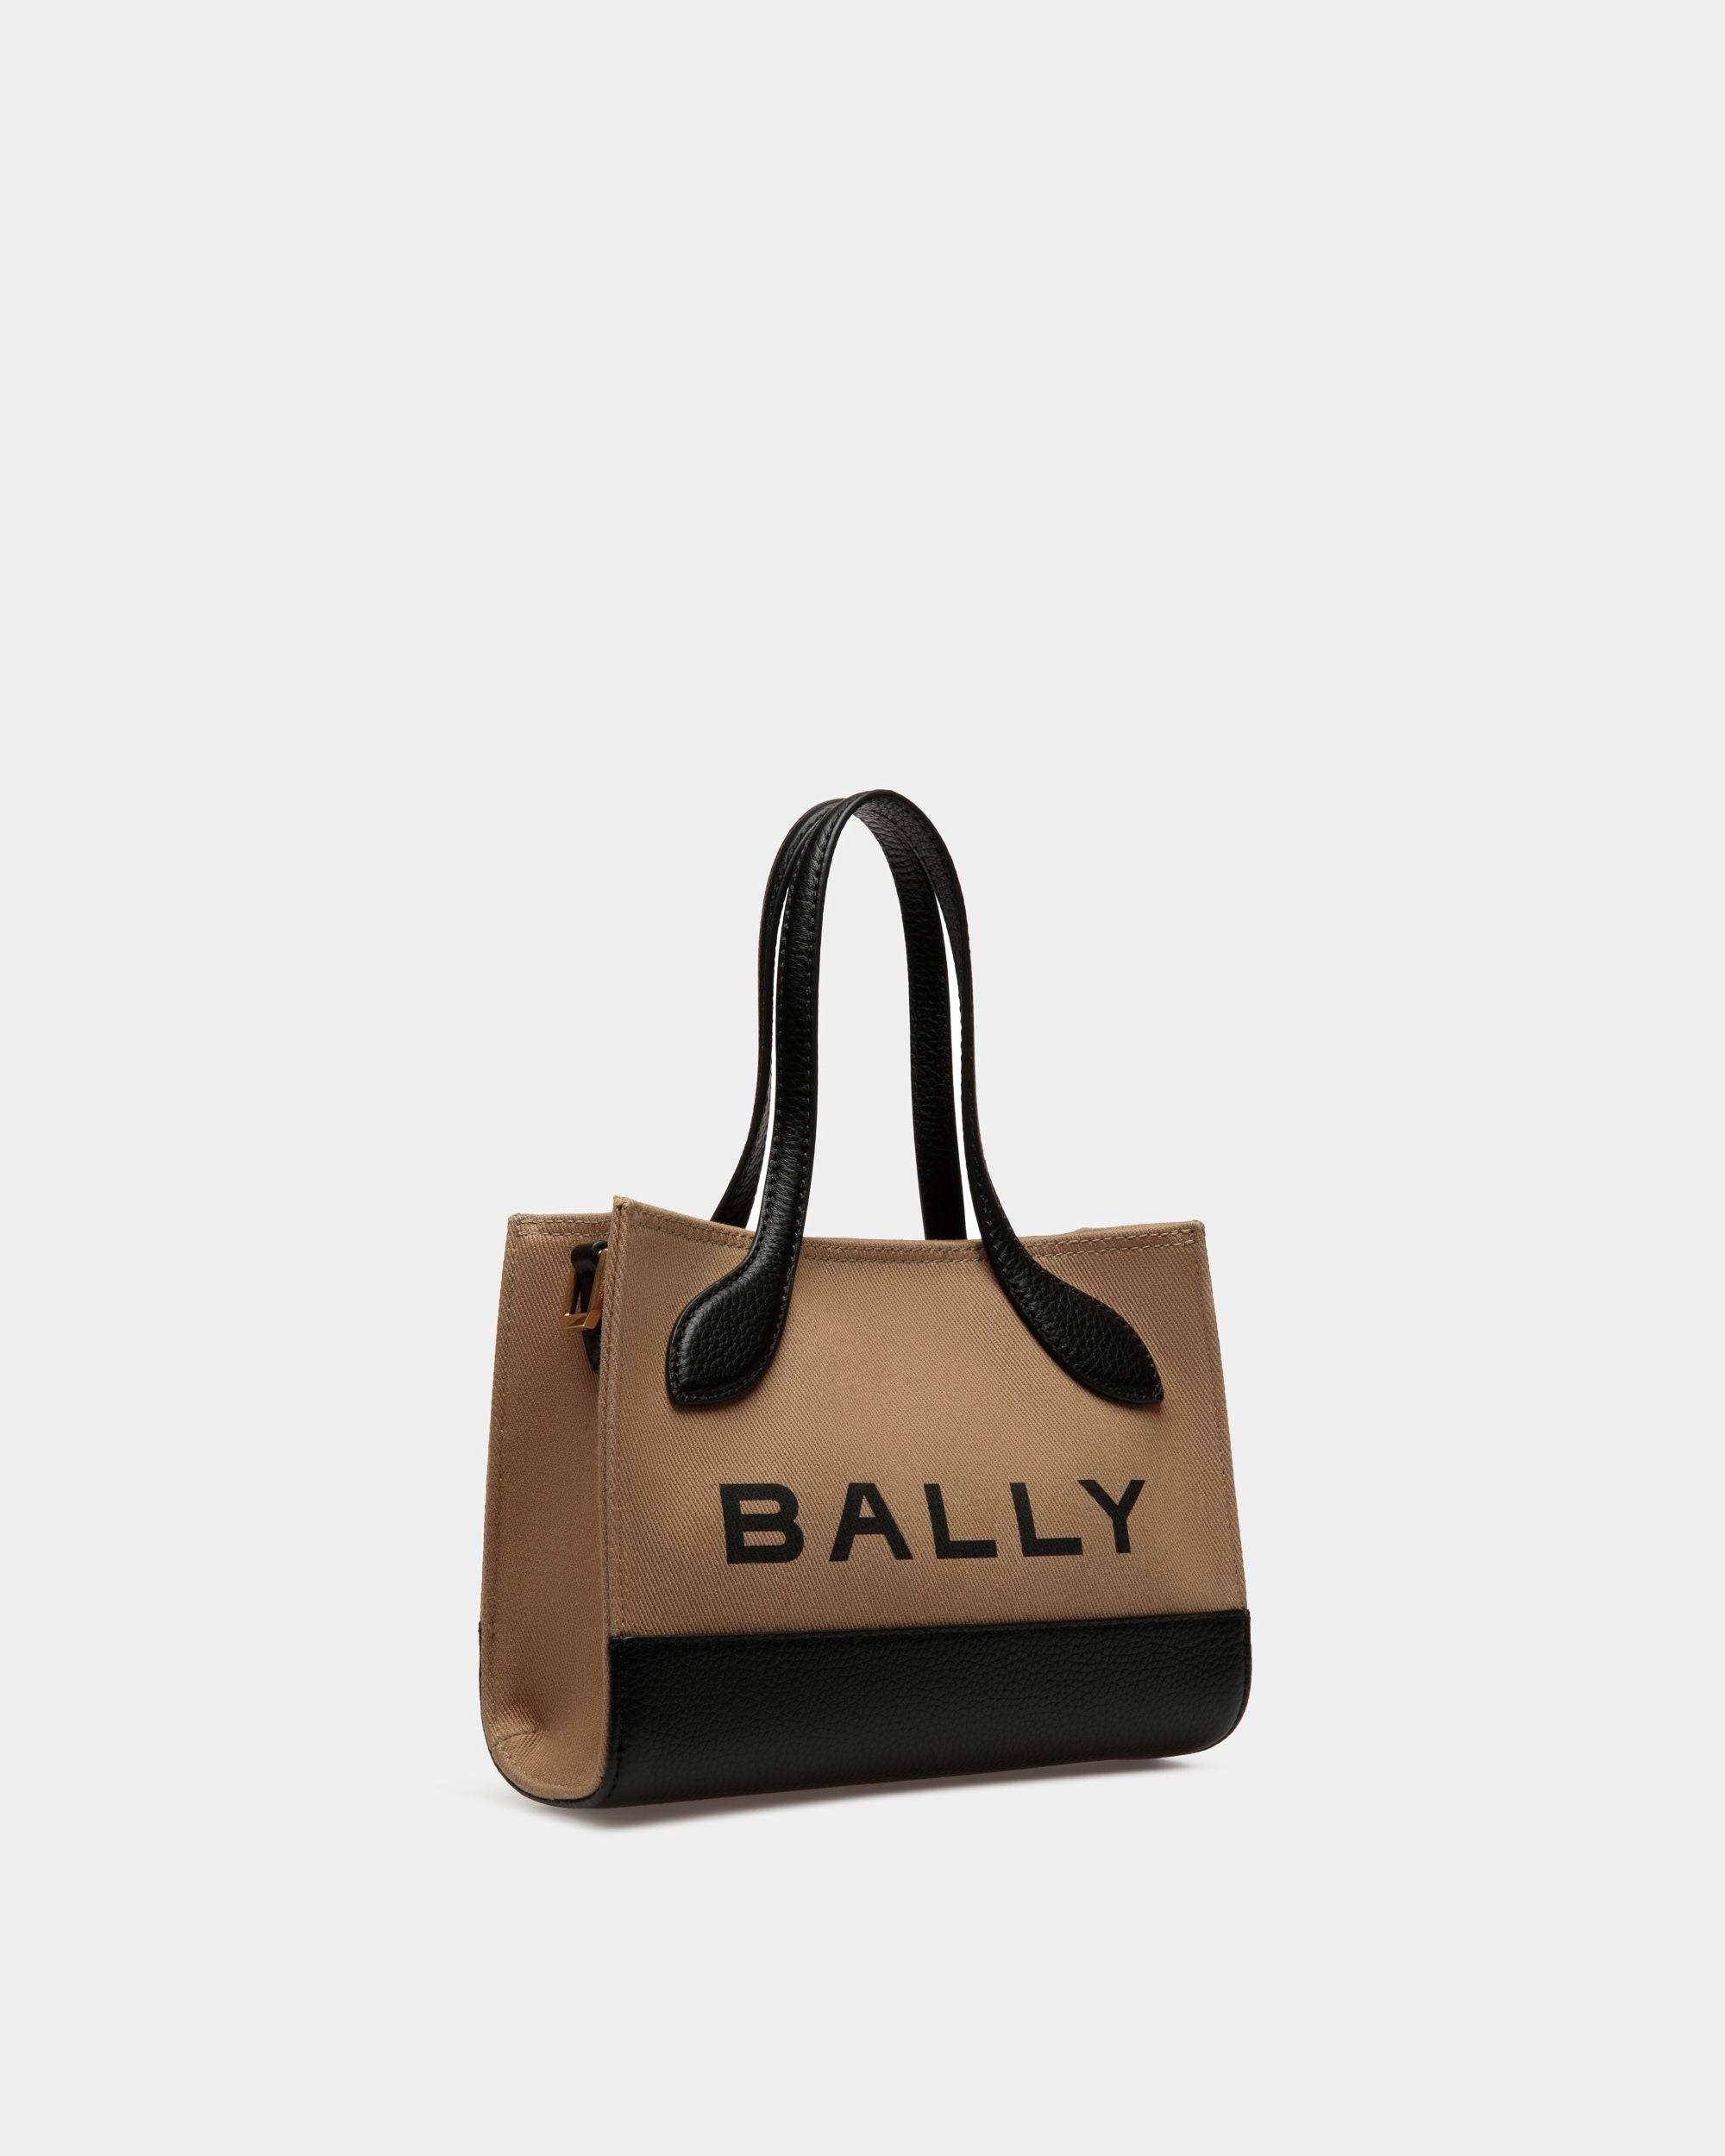 Bar Keep On Extra Small | Women's Minibag | Sand And Black Fabric | Bally | Still Life 3/4 Front